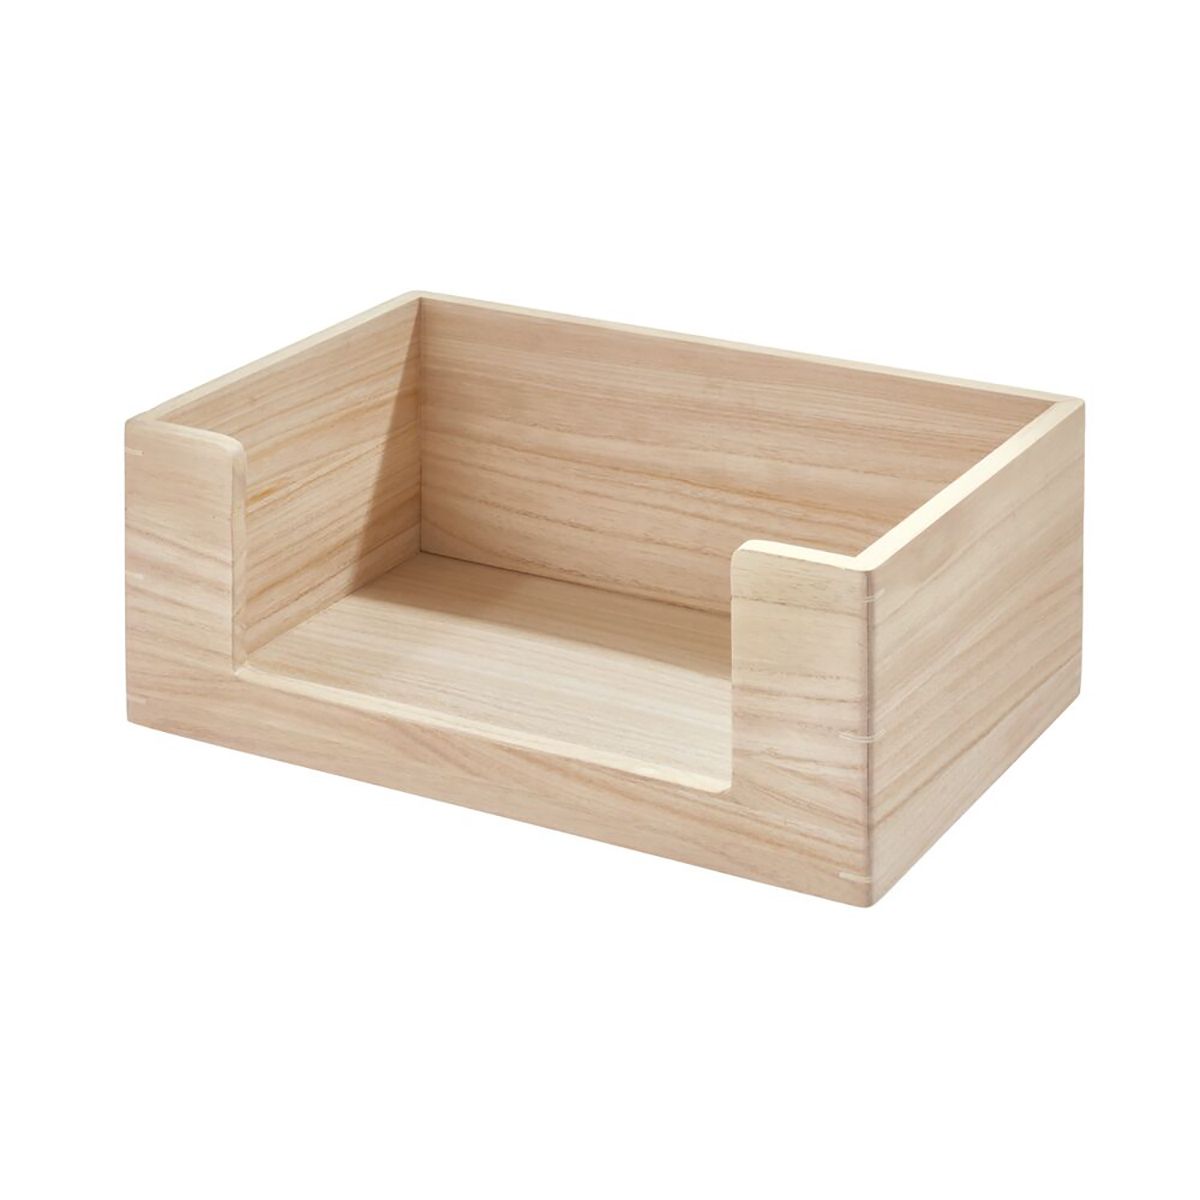 THE HOME EDIT Large Wooden Open Front Bin SandSKU:100844454.03 Reviews | The Container Store